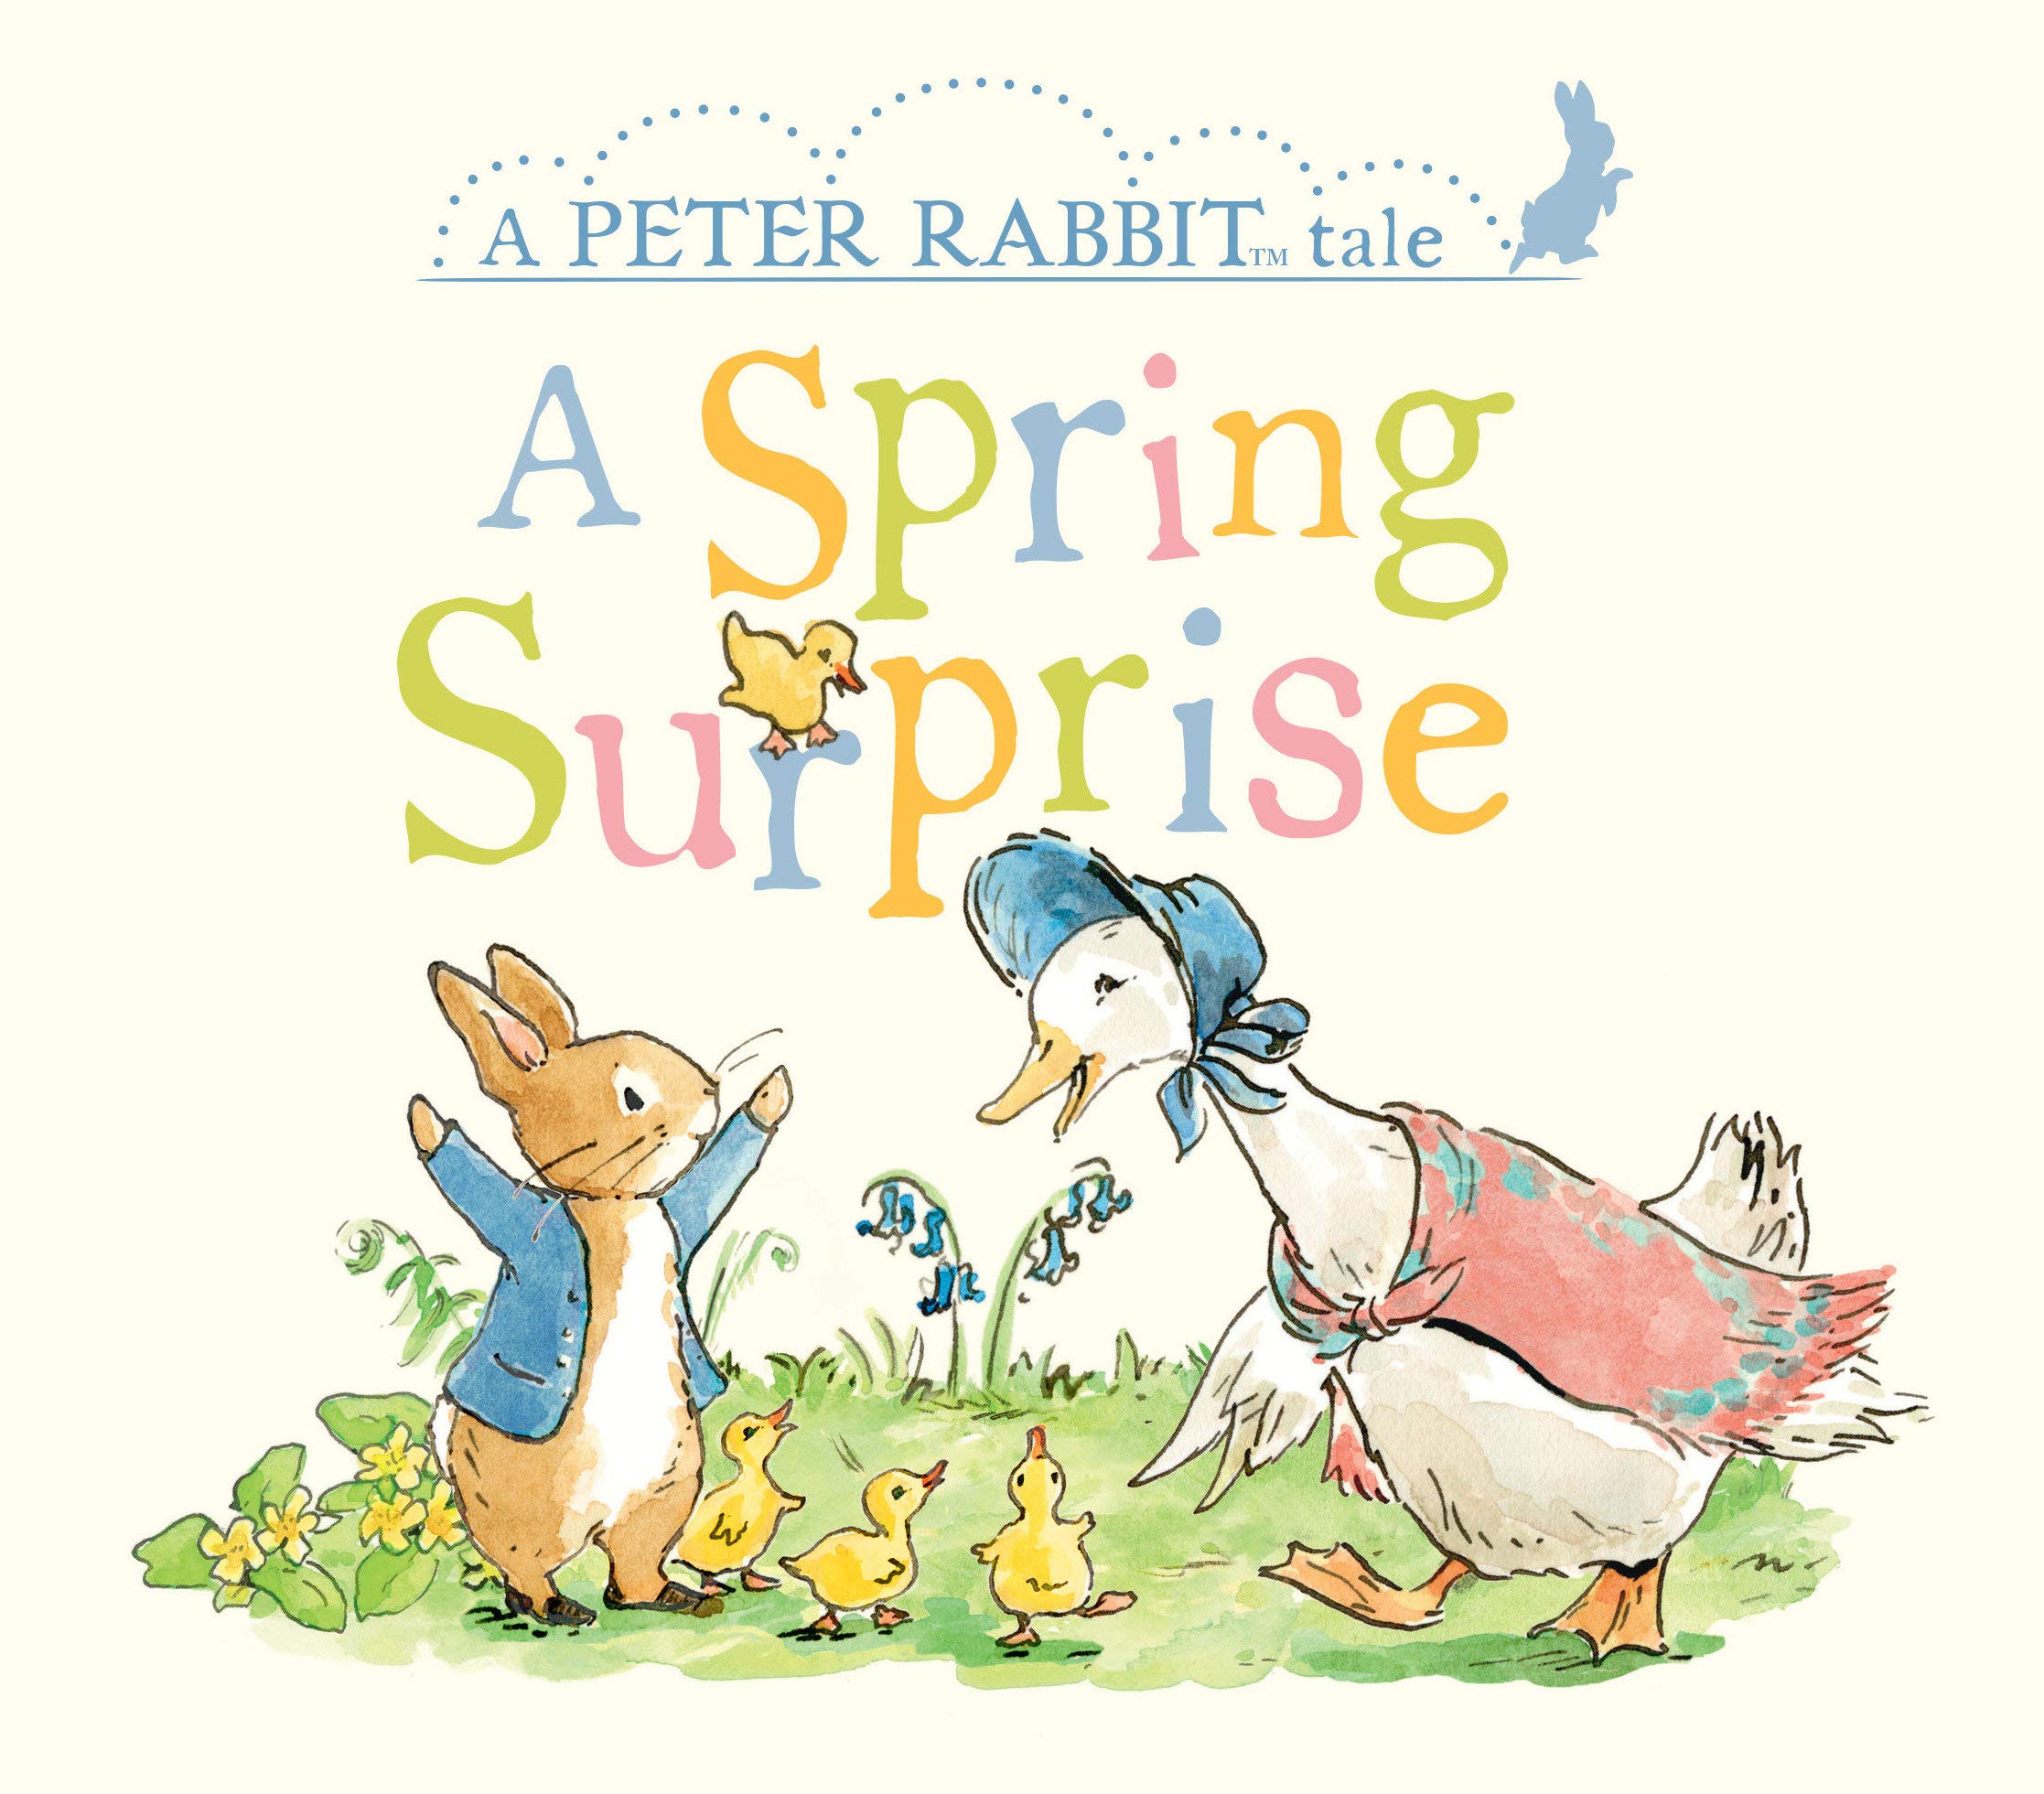 Image for "A Spring Surprise"